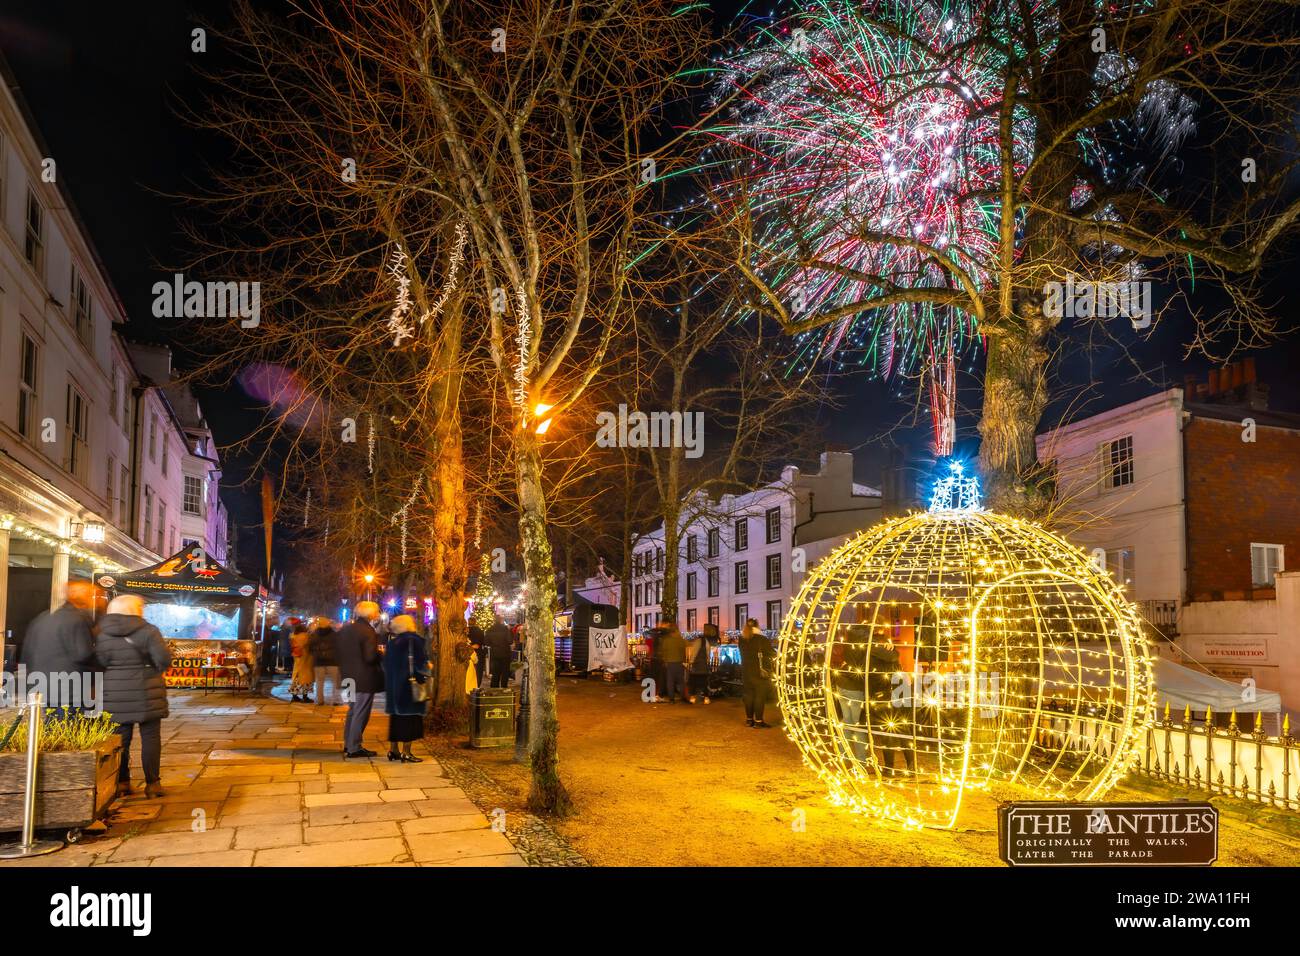 The Pantiles, Royal Tunbridge Wells, Kent, England. 31 December 2023. The historic Royal town of Tunbridge Wells turns out for the organised celbrations on The Pantiles, with a  firework display at midnight that attracts large crowds to welcome in the new year 2024. ©Sarah Mott / Alamy Live News. Stock Photo